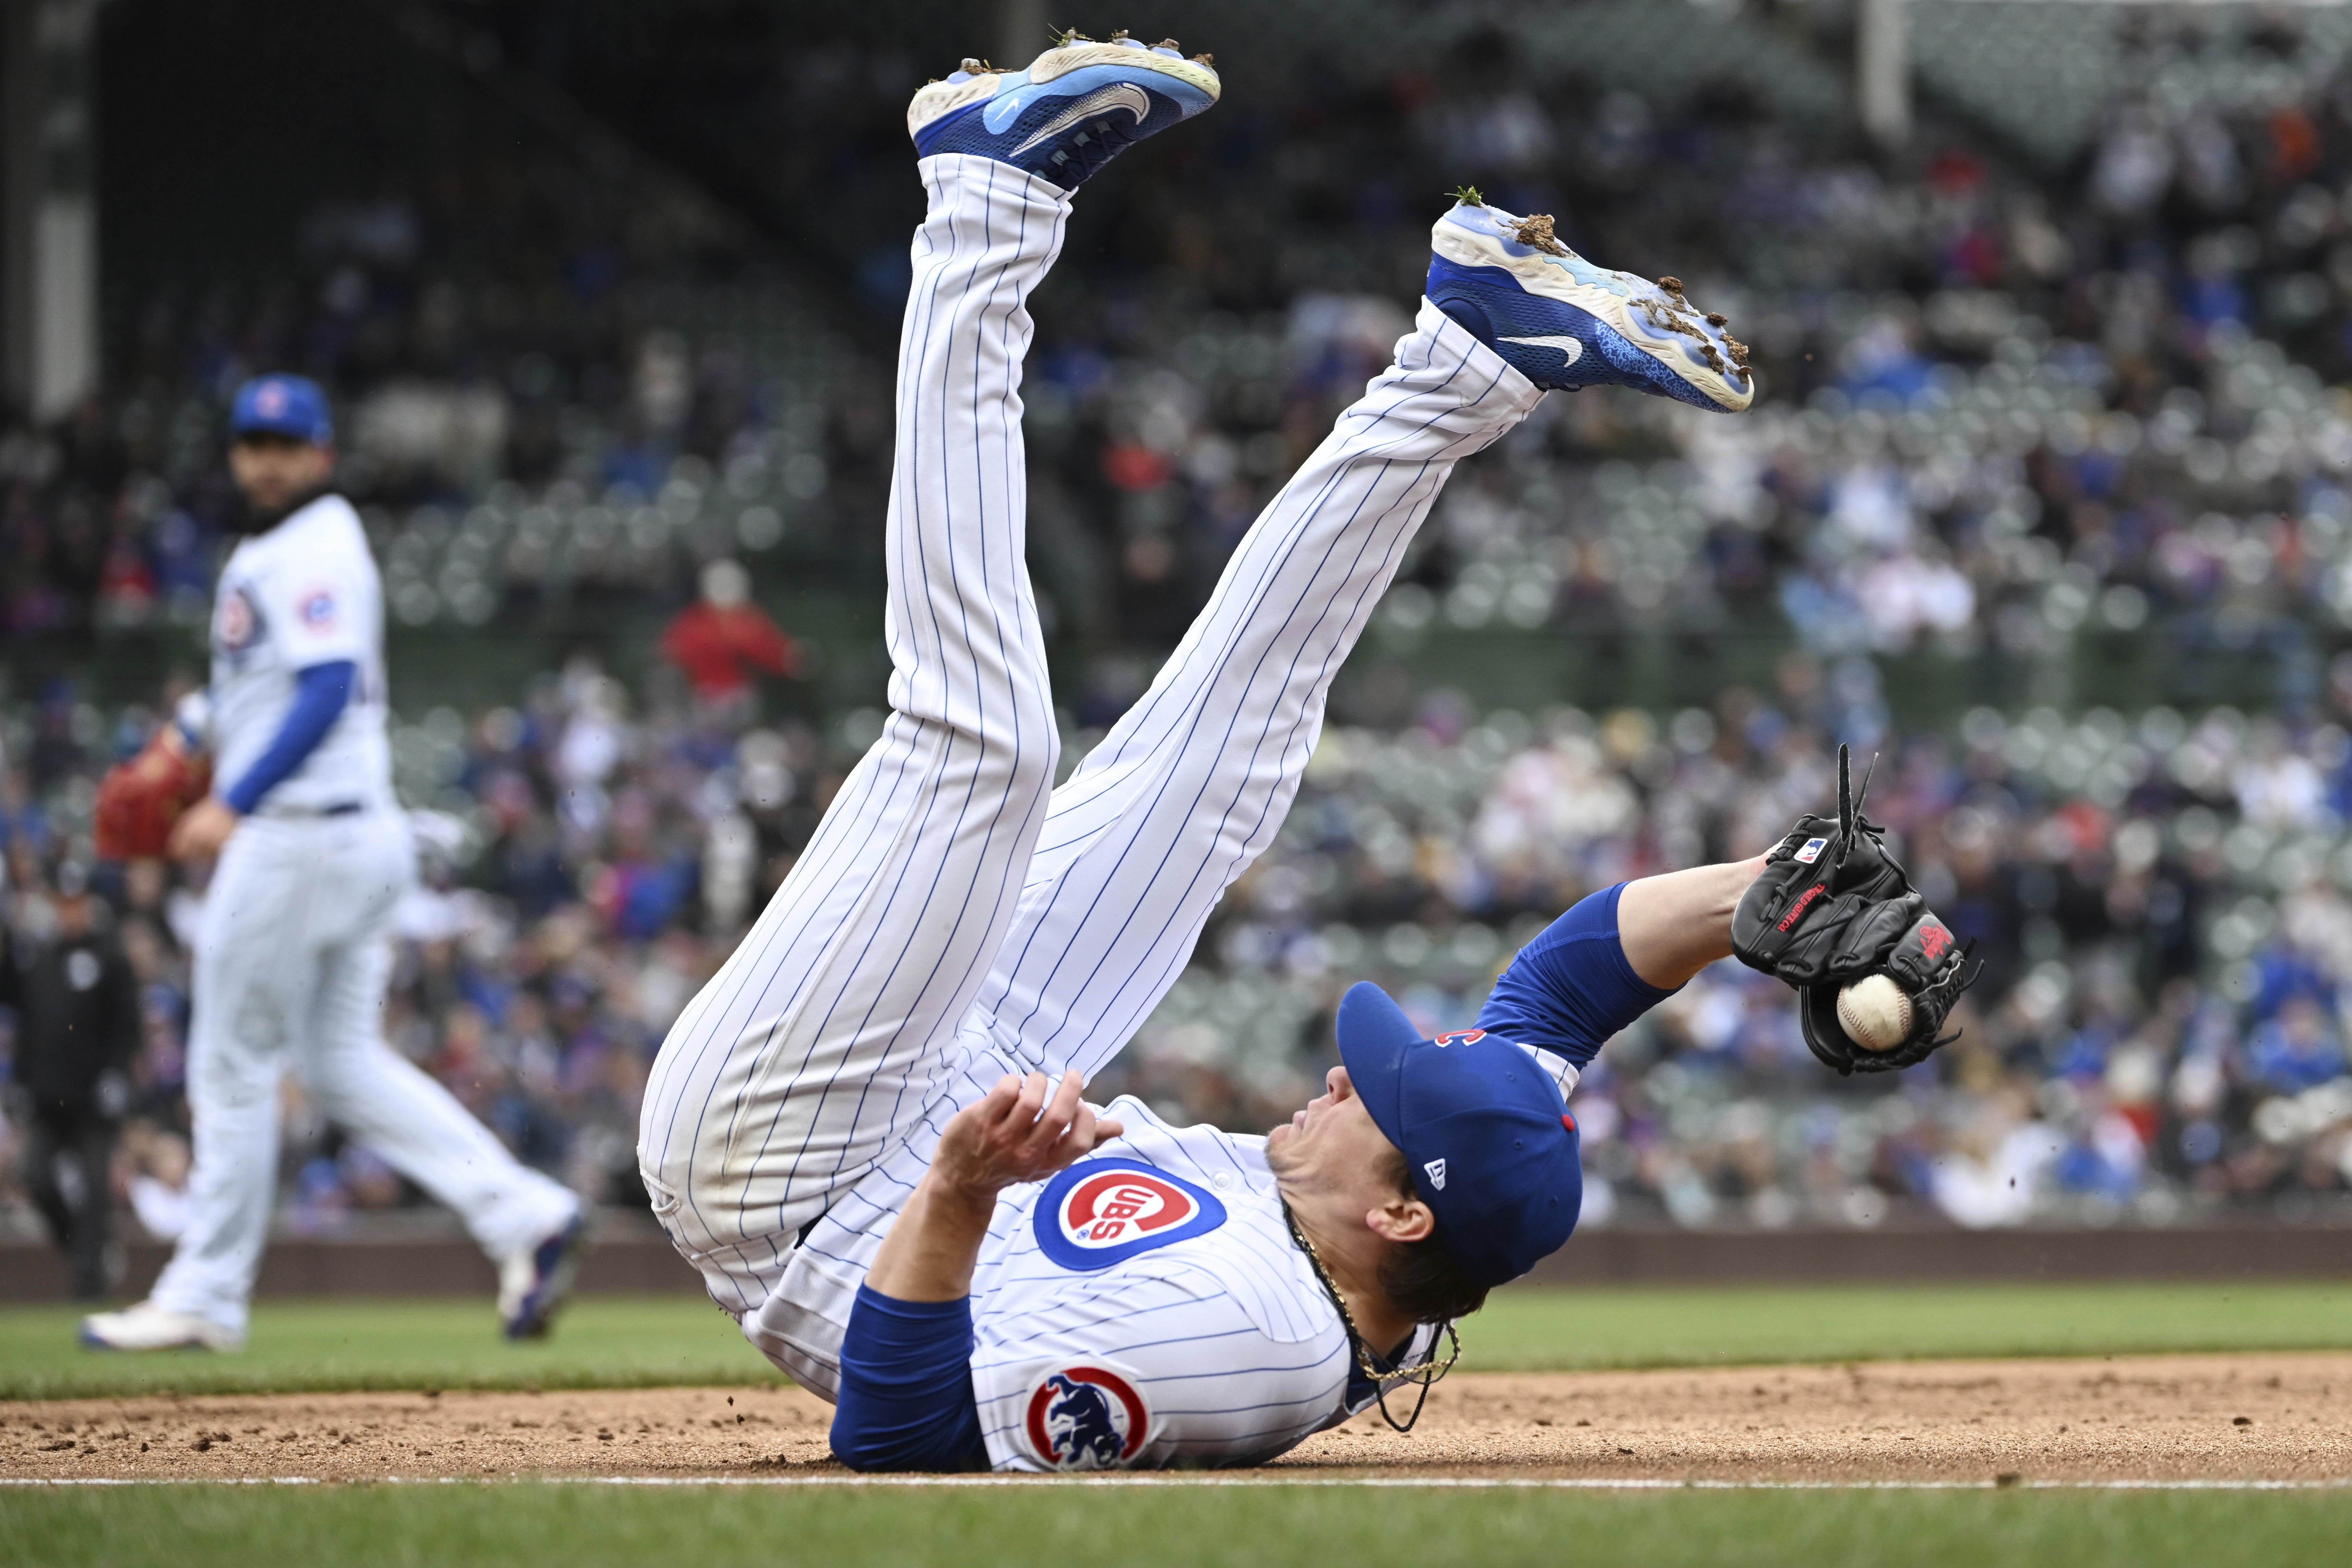 Chicago Cubs: Justin Steele's strong start wasted in 3-1 loss